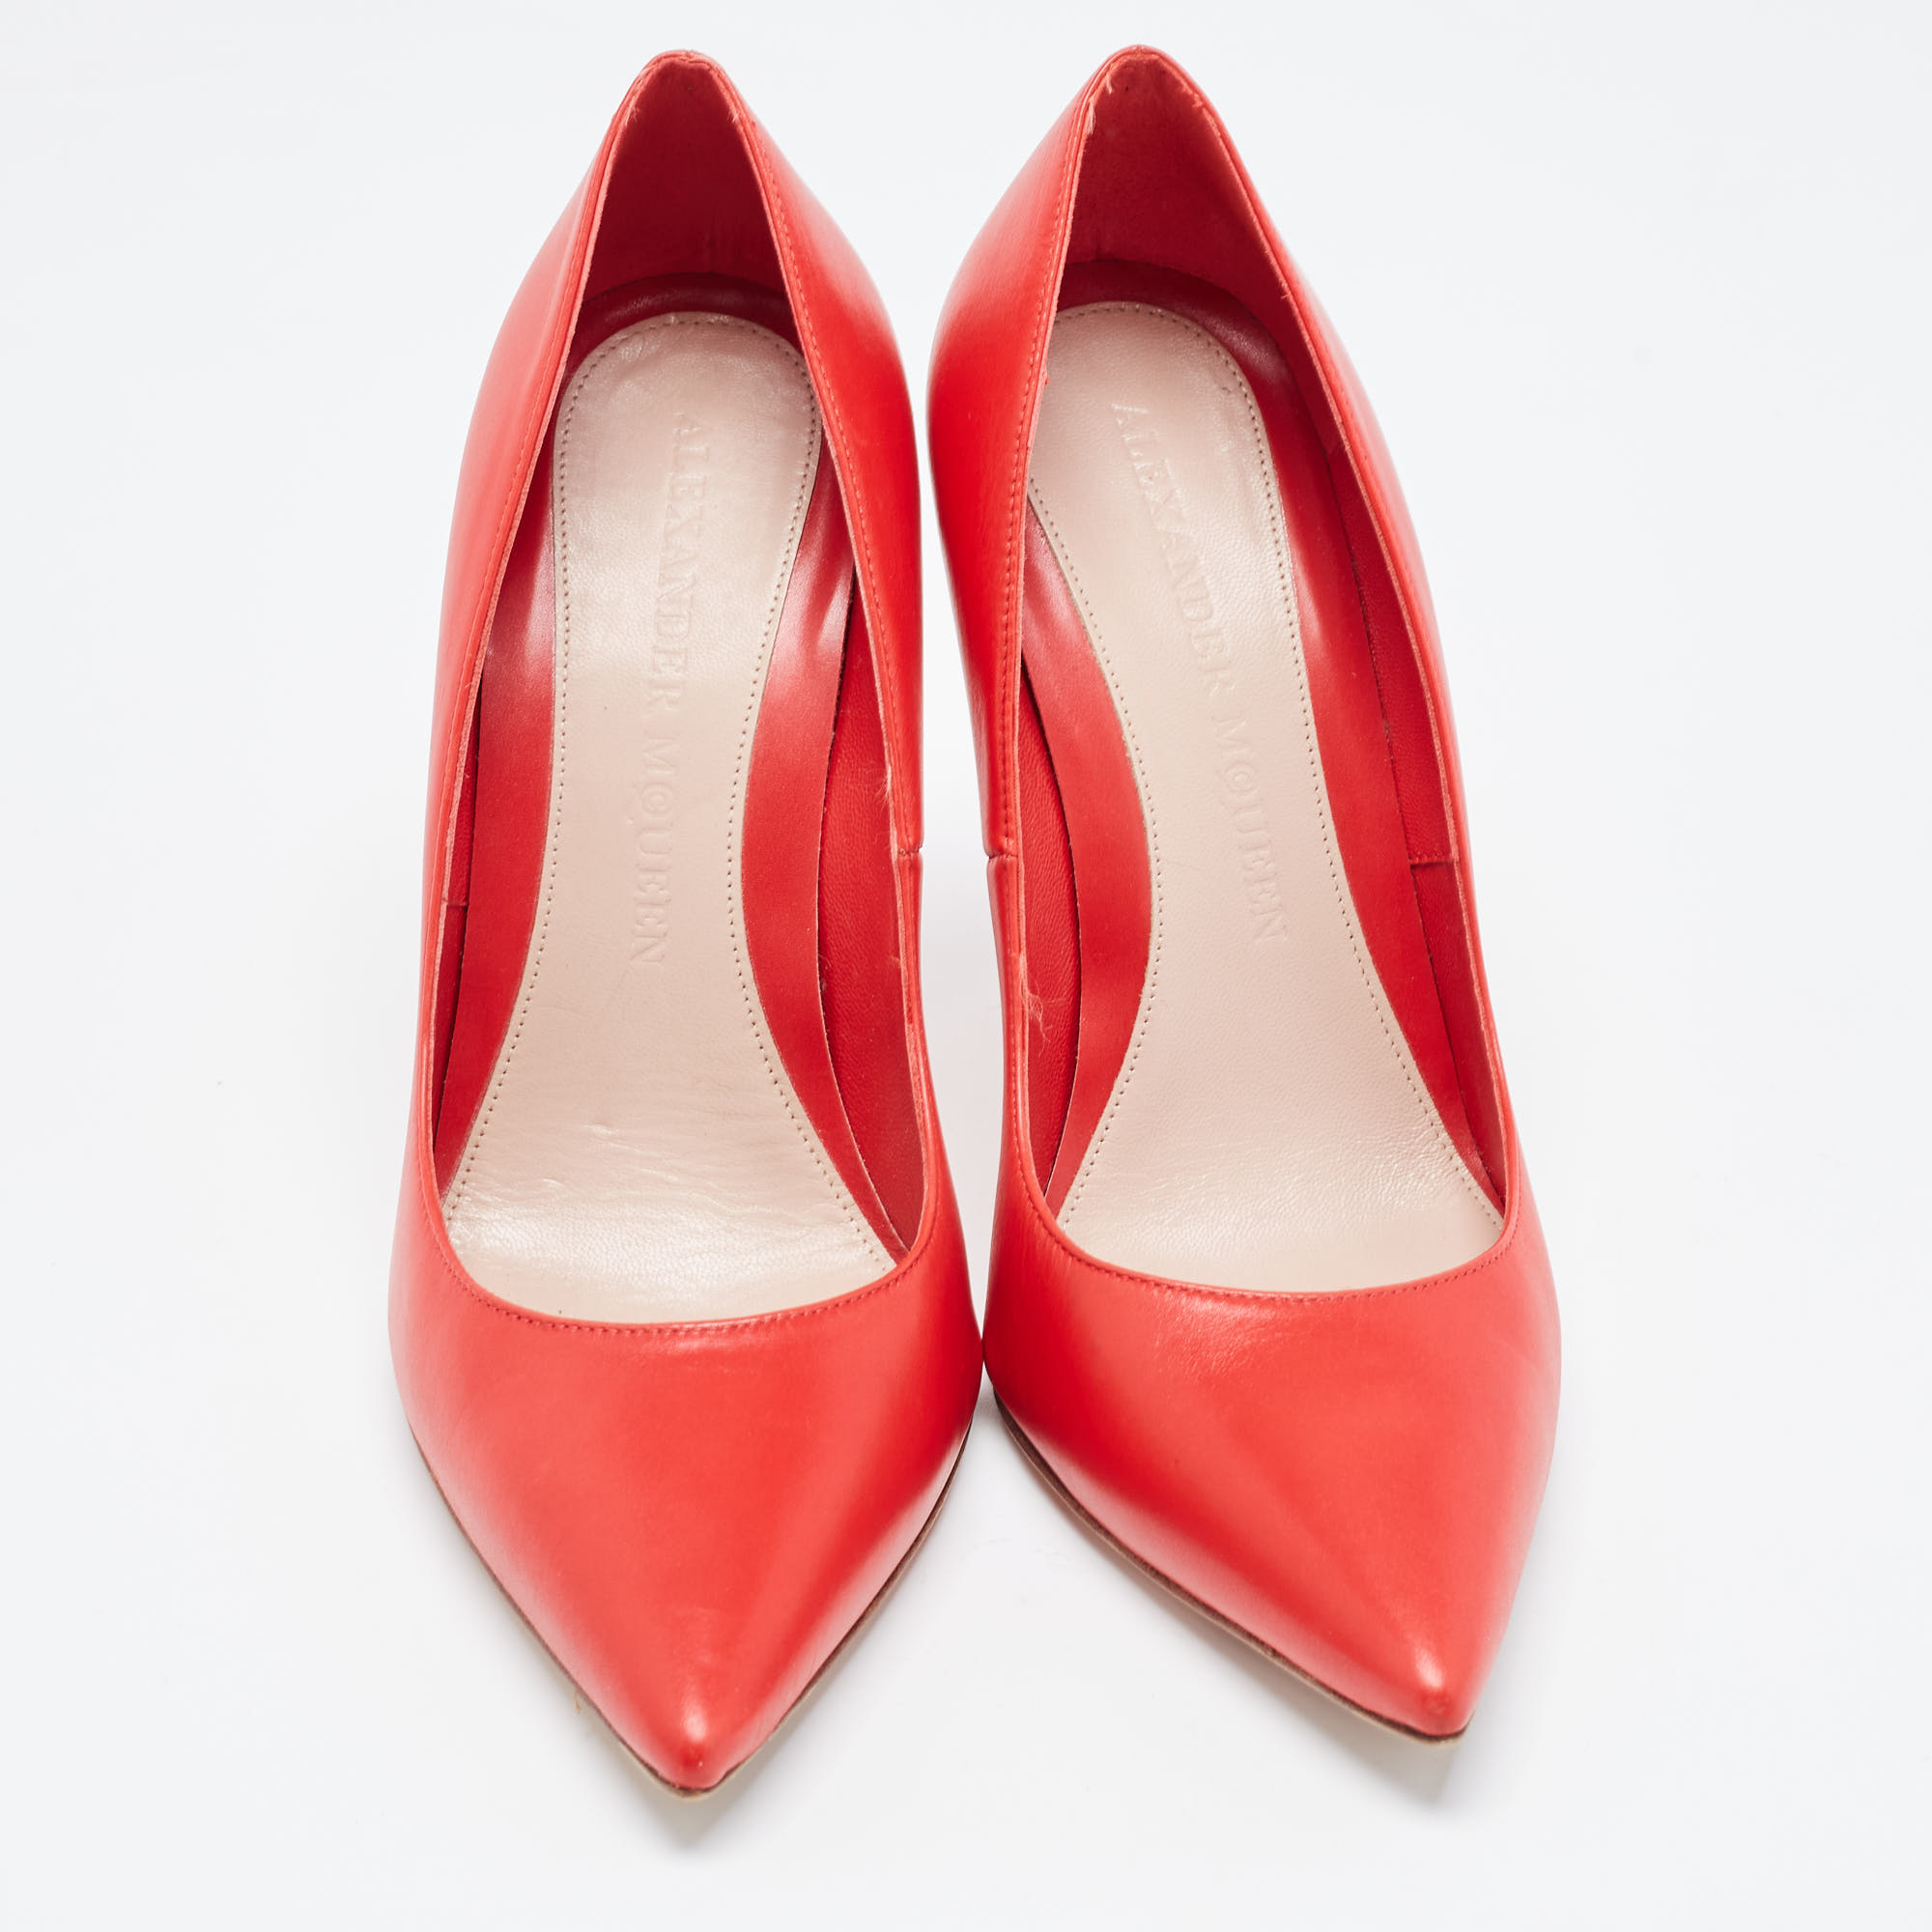 Alexander McQueen Red Leather Pointed Toe Pumps Size 38